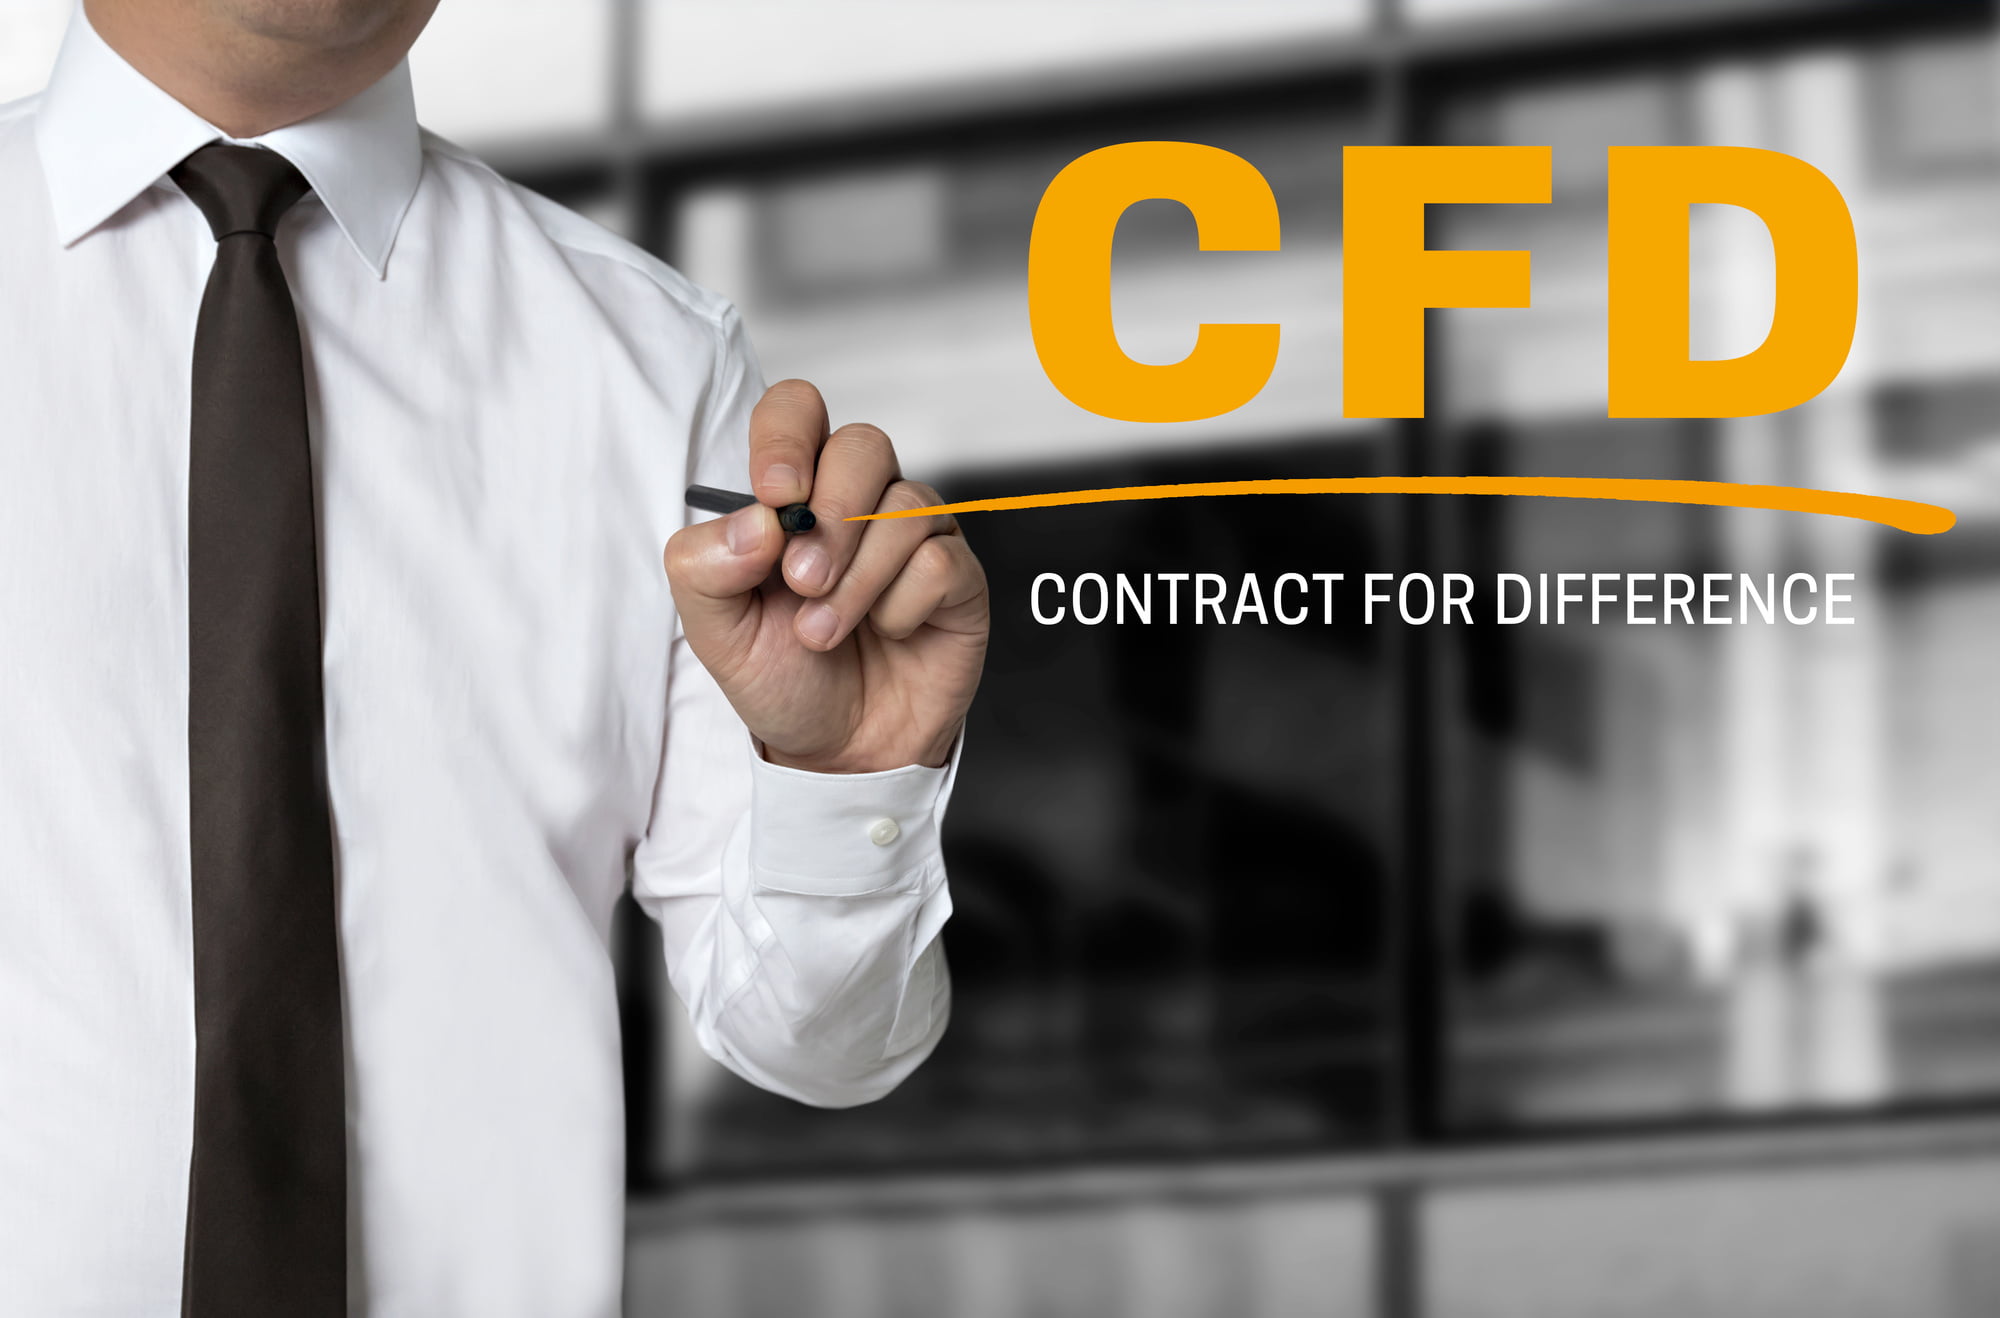 What do you know about how to trade CFDs? Get a brief breakdown of how these financial contracts work and more here in this guide.